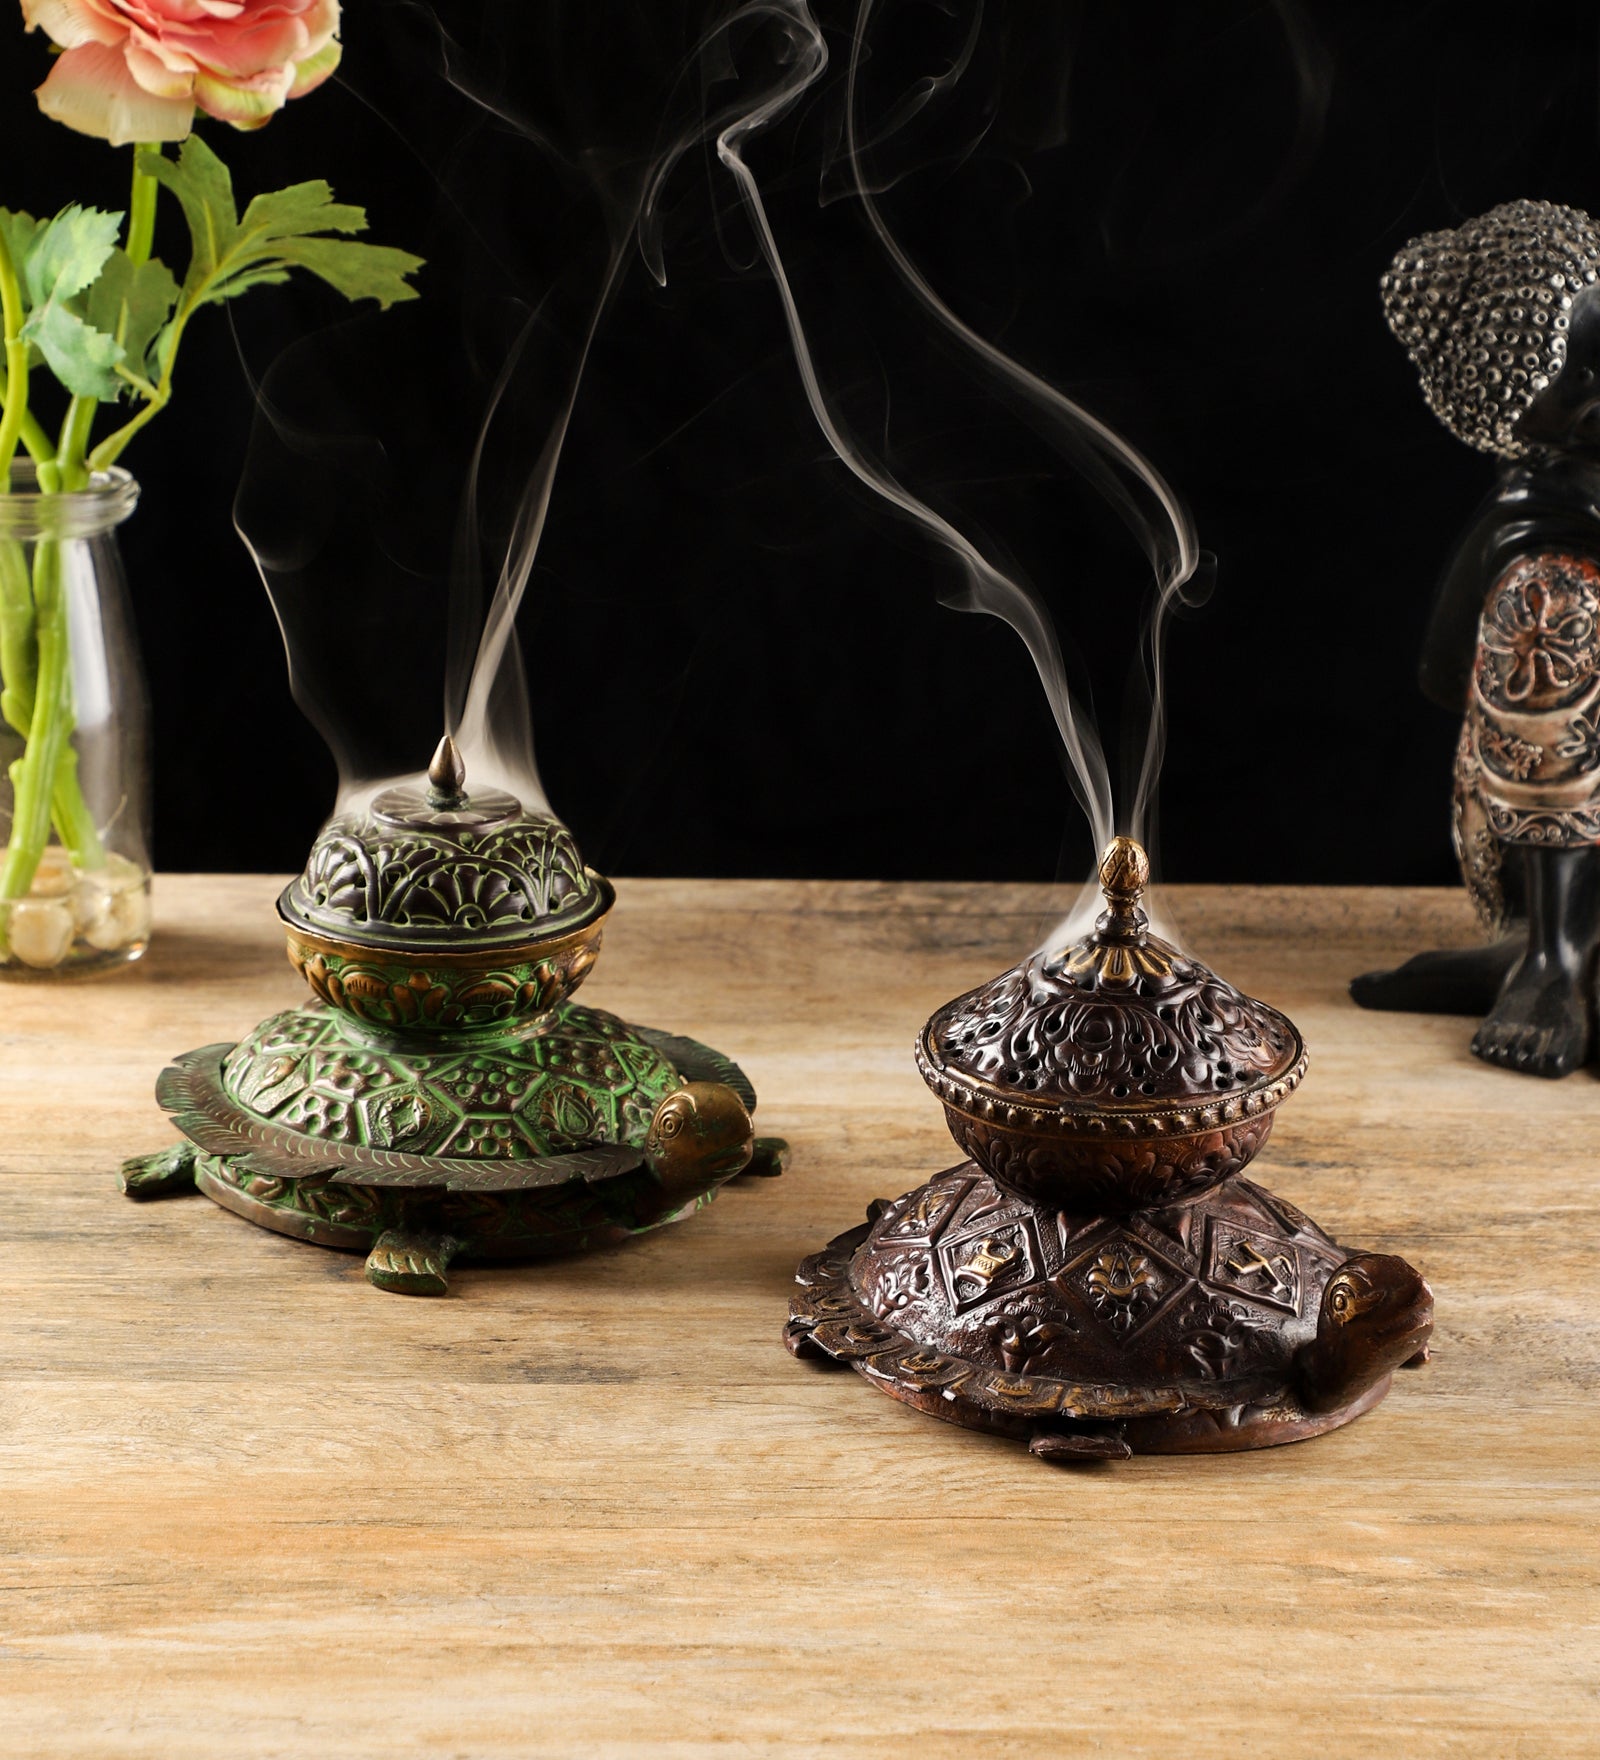 The Turtle Hunch (Single) - Incense Holder/Table Top Decor